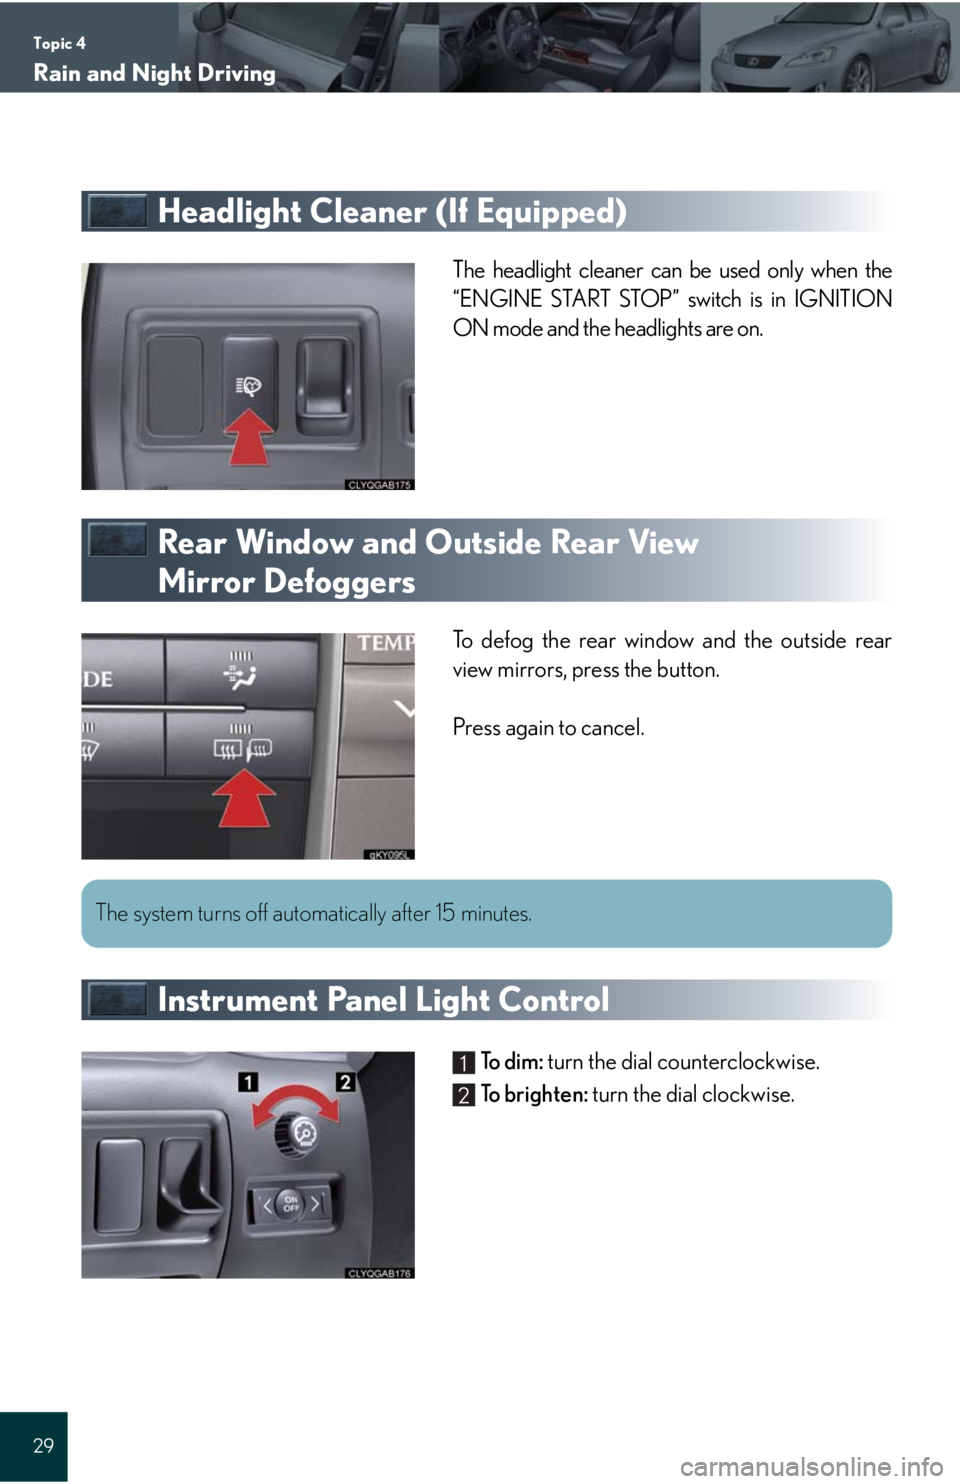 Lexus IS250 2008  Instrument cluster / LEXUS 2008 IS 350/250 QUICK GUIDE OWNERS MANUAL (OM60D81U) Topic 4
Rain and Night Driving
29
Headlight Cleaner (If Equipped)
The headlight cleaner can be used only when the
“ENGINE START STOP” switch is in IGNITION
ON mode and the headlights are on.
Rear 